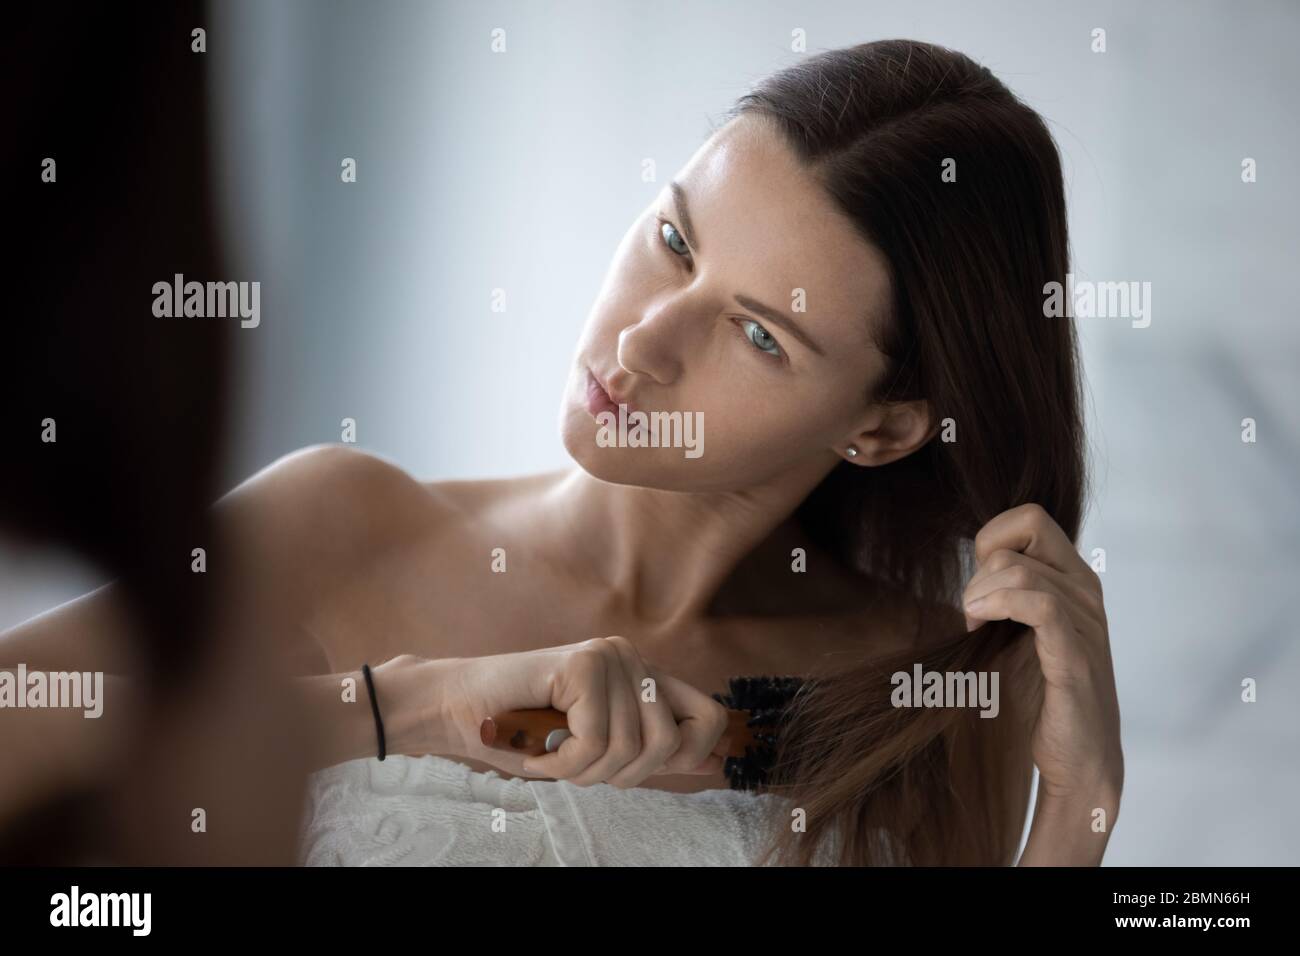 Woman combing hair looking dissatisfied by naughty tangled hair Stock Photo